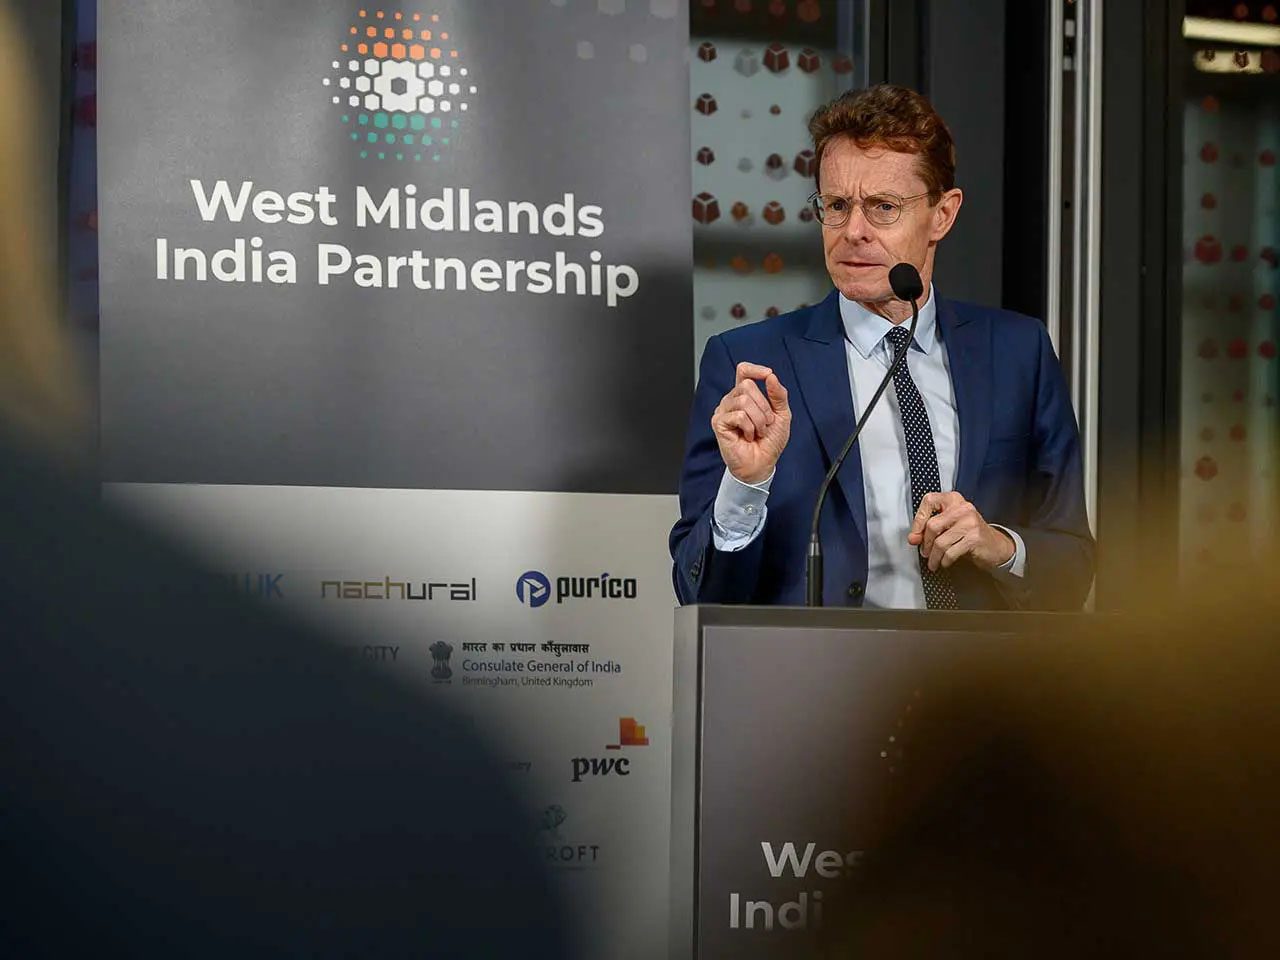 Andy Street speaking at a podium with the text 'West Midlands India Partnership'.